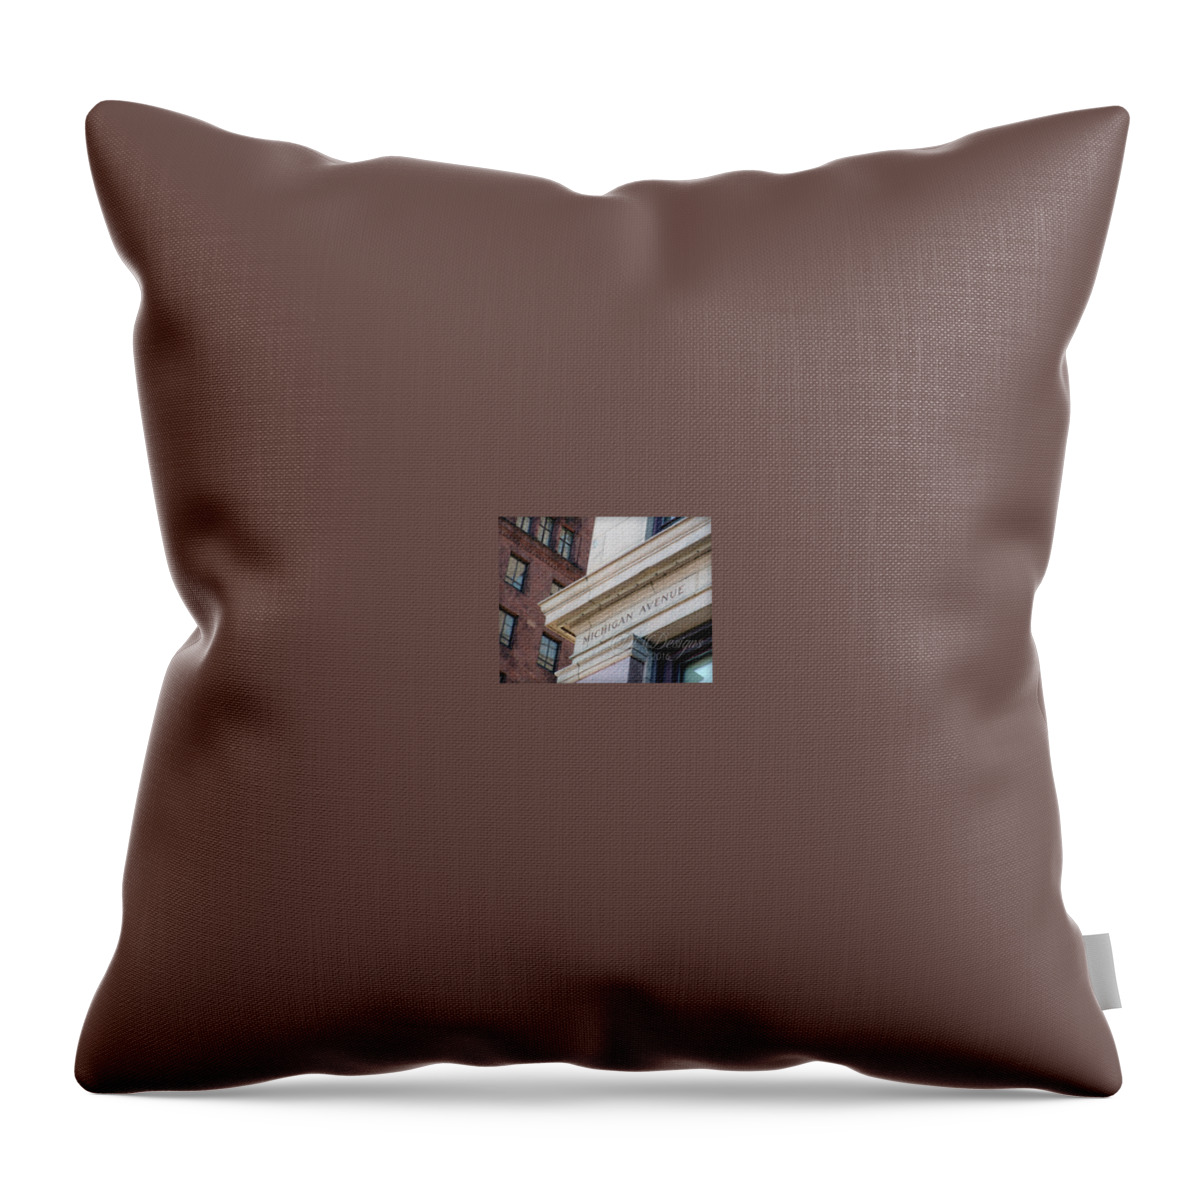 Chicago Throw Pillow featuring the photograph Michigan Avenue Chicago by DiDesigns Graphics